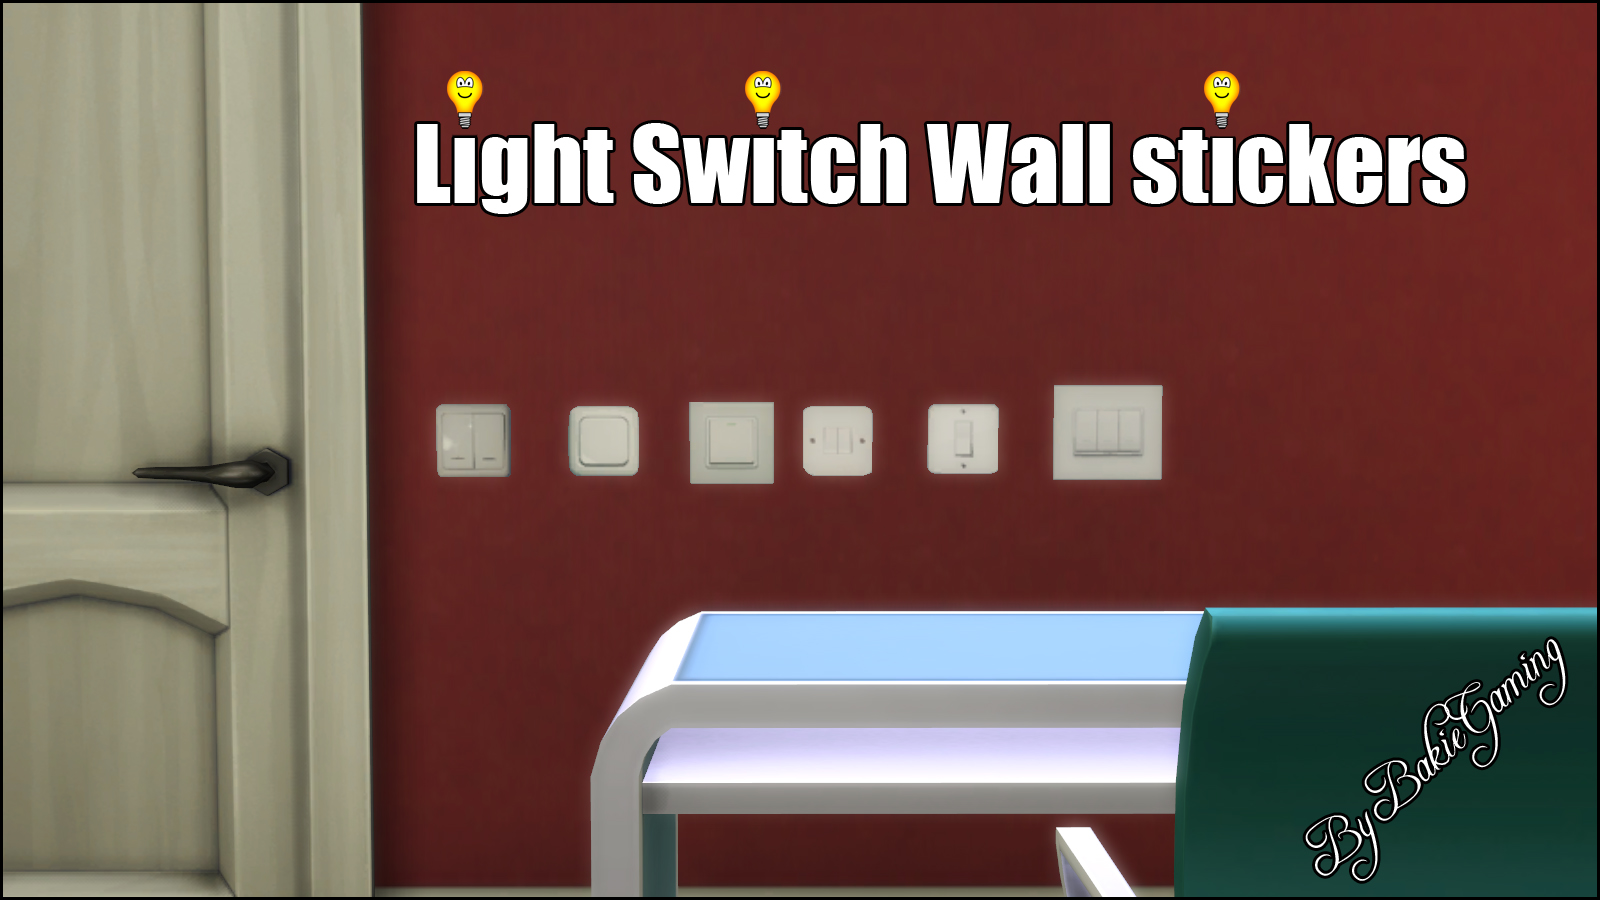 http://thumbs.modthesims2.com/img/3/7/5/1/1/1/9/MTS_Bakie-1509216-LightSwitchThumb.jpg